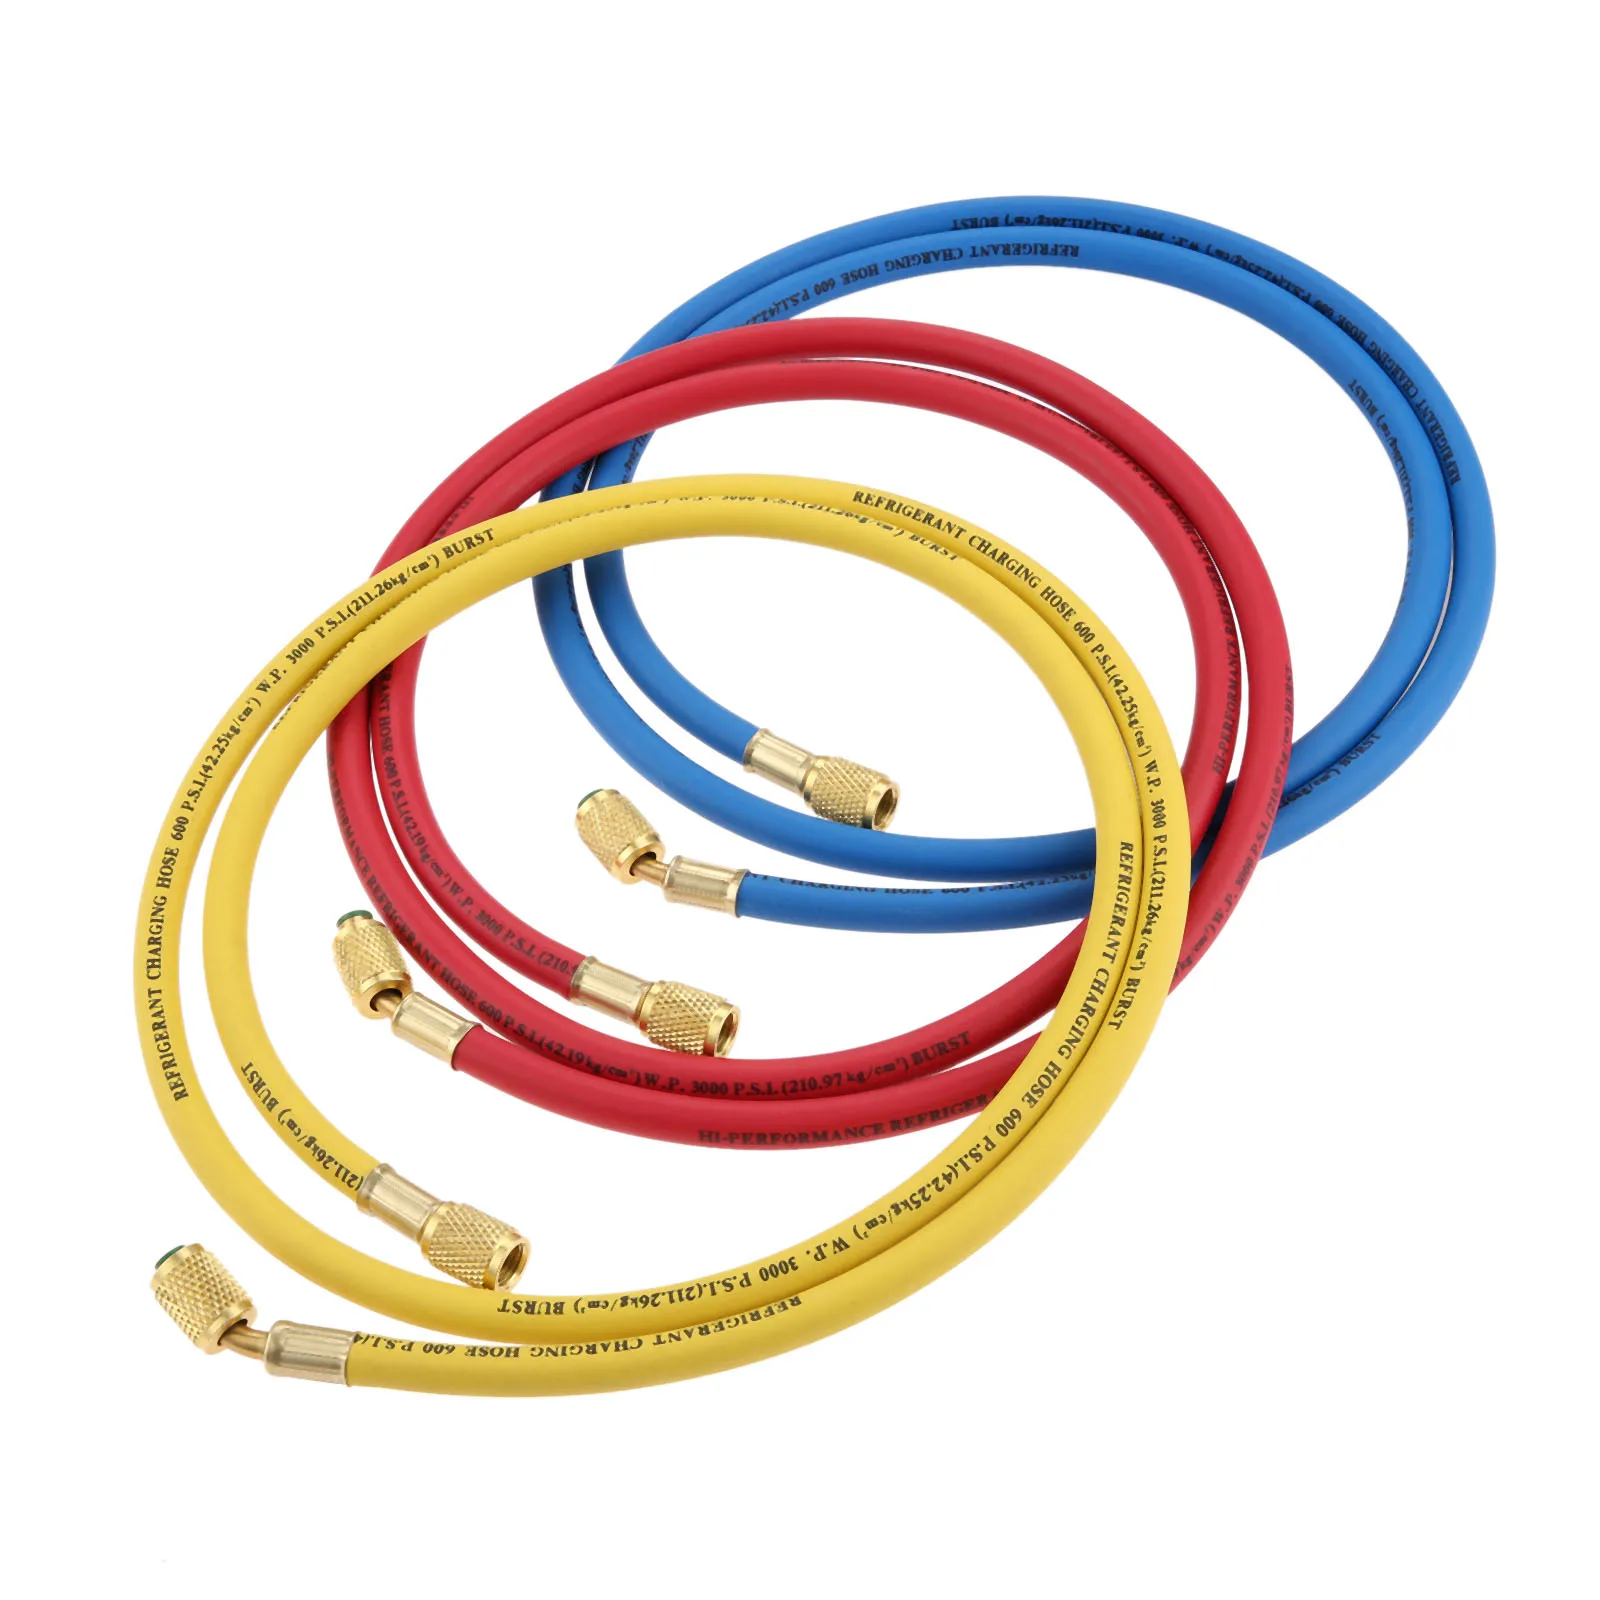 

3Pcs R134a R22 R410a Refrigeration Charging Hoses 1/4" SAE Female Manifold Gauge Set For Air Conditioning Red/Blue/Yellow